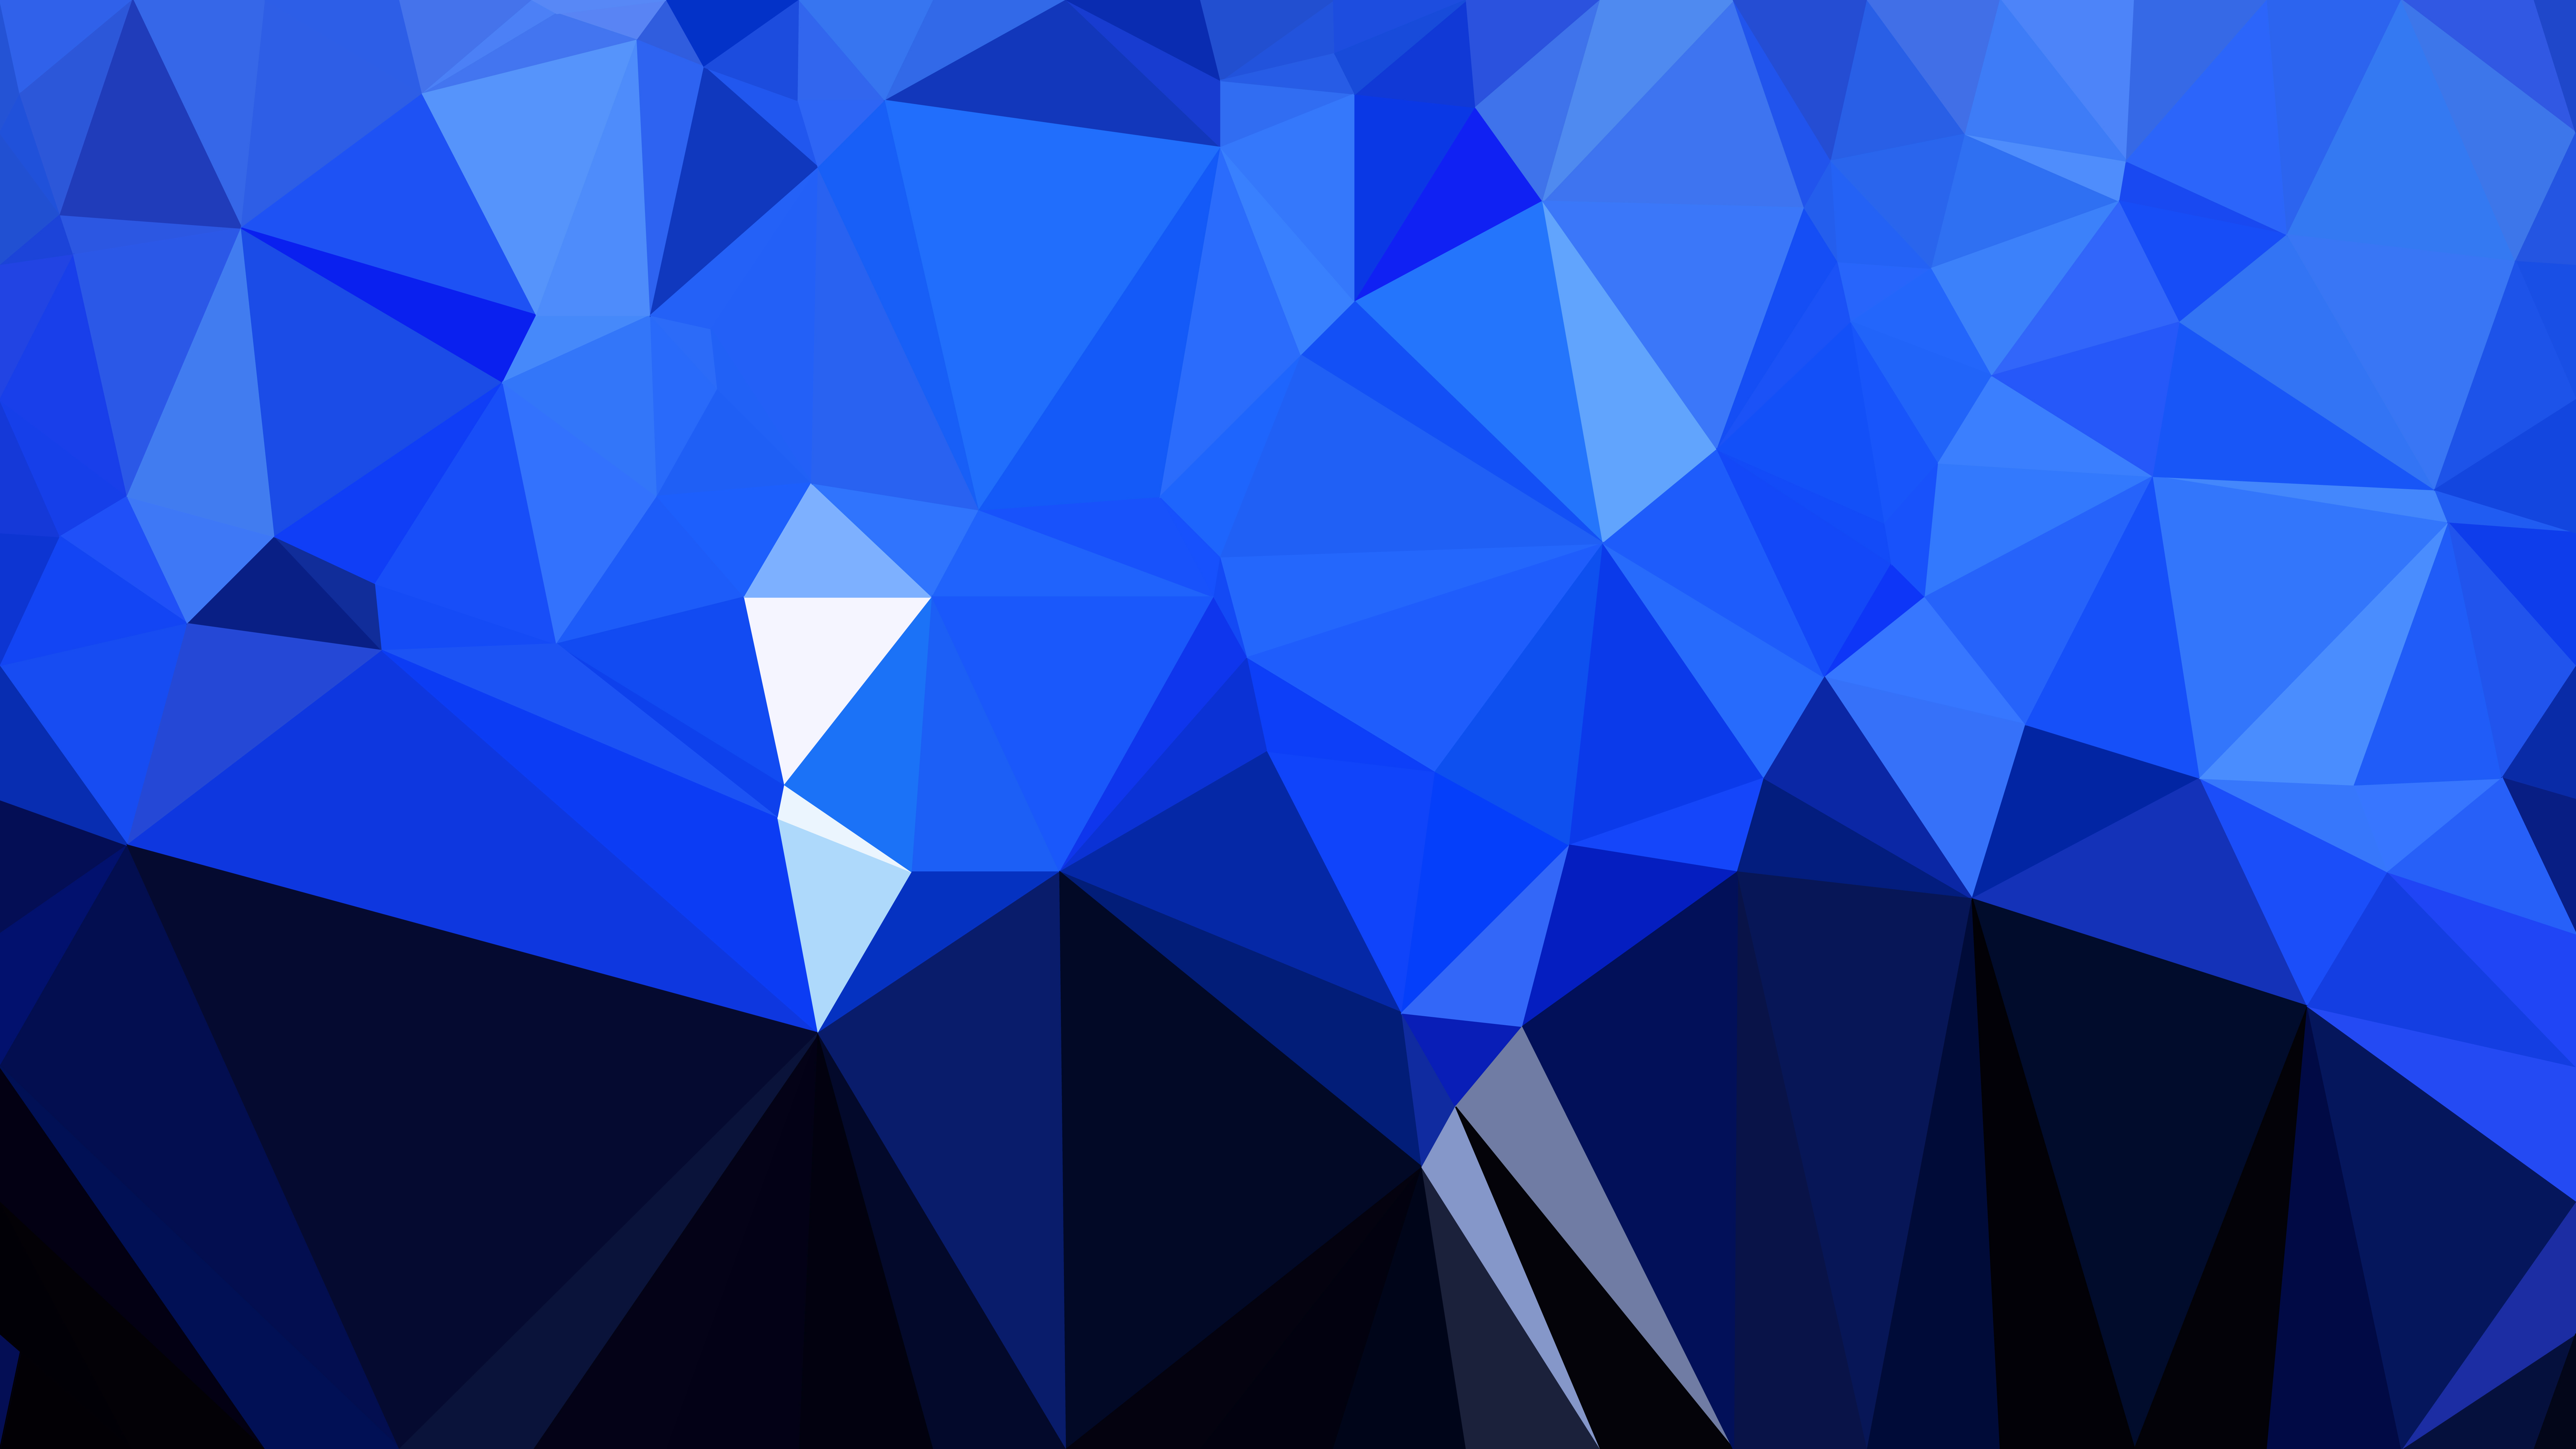 Free Abstract Cool Blue Polygonal Triangle Background Vector